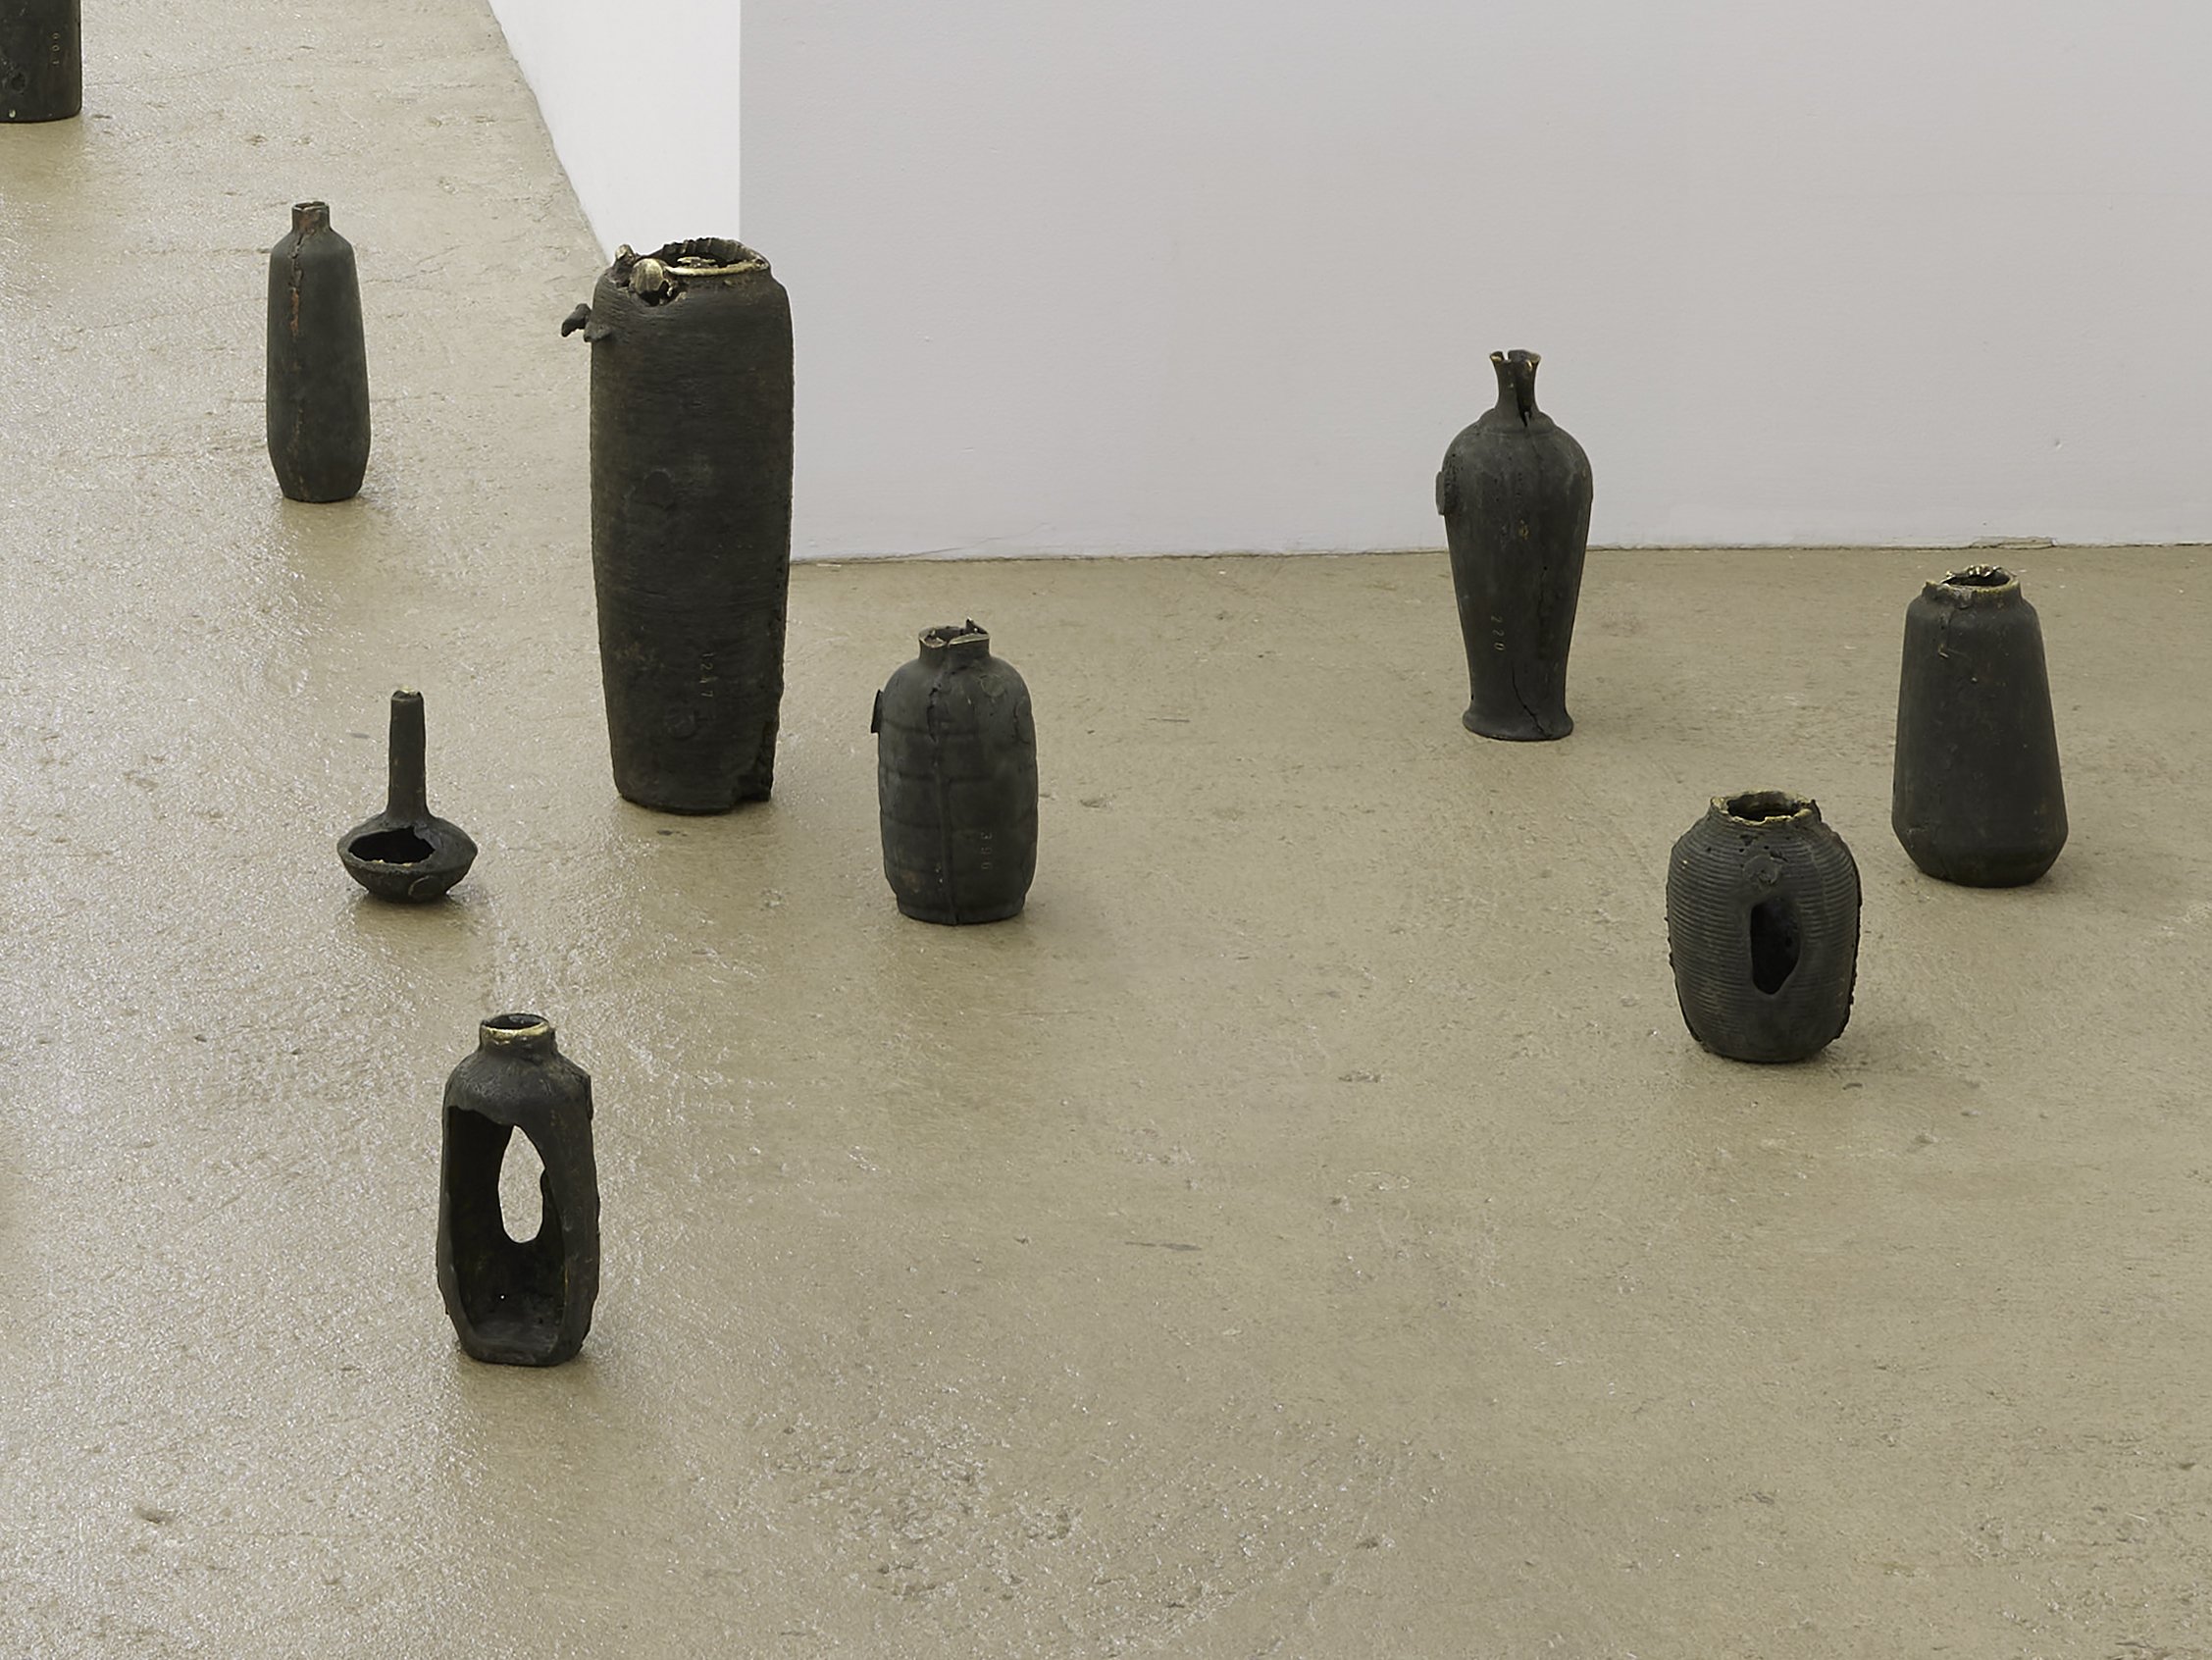  Sean Donovan titles vary, 2022 8 of 17 urns sand-cast from 74 up to 1,247 AR-15 rifle ammunition casings, patina each stamped and titled with the number of brass casings used in its casting 4.5 x 3.5 inches (12 x 9 cm) up to 12.25 x 5 inches (31 x 1